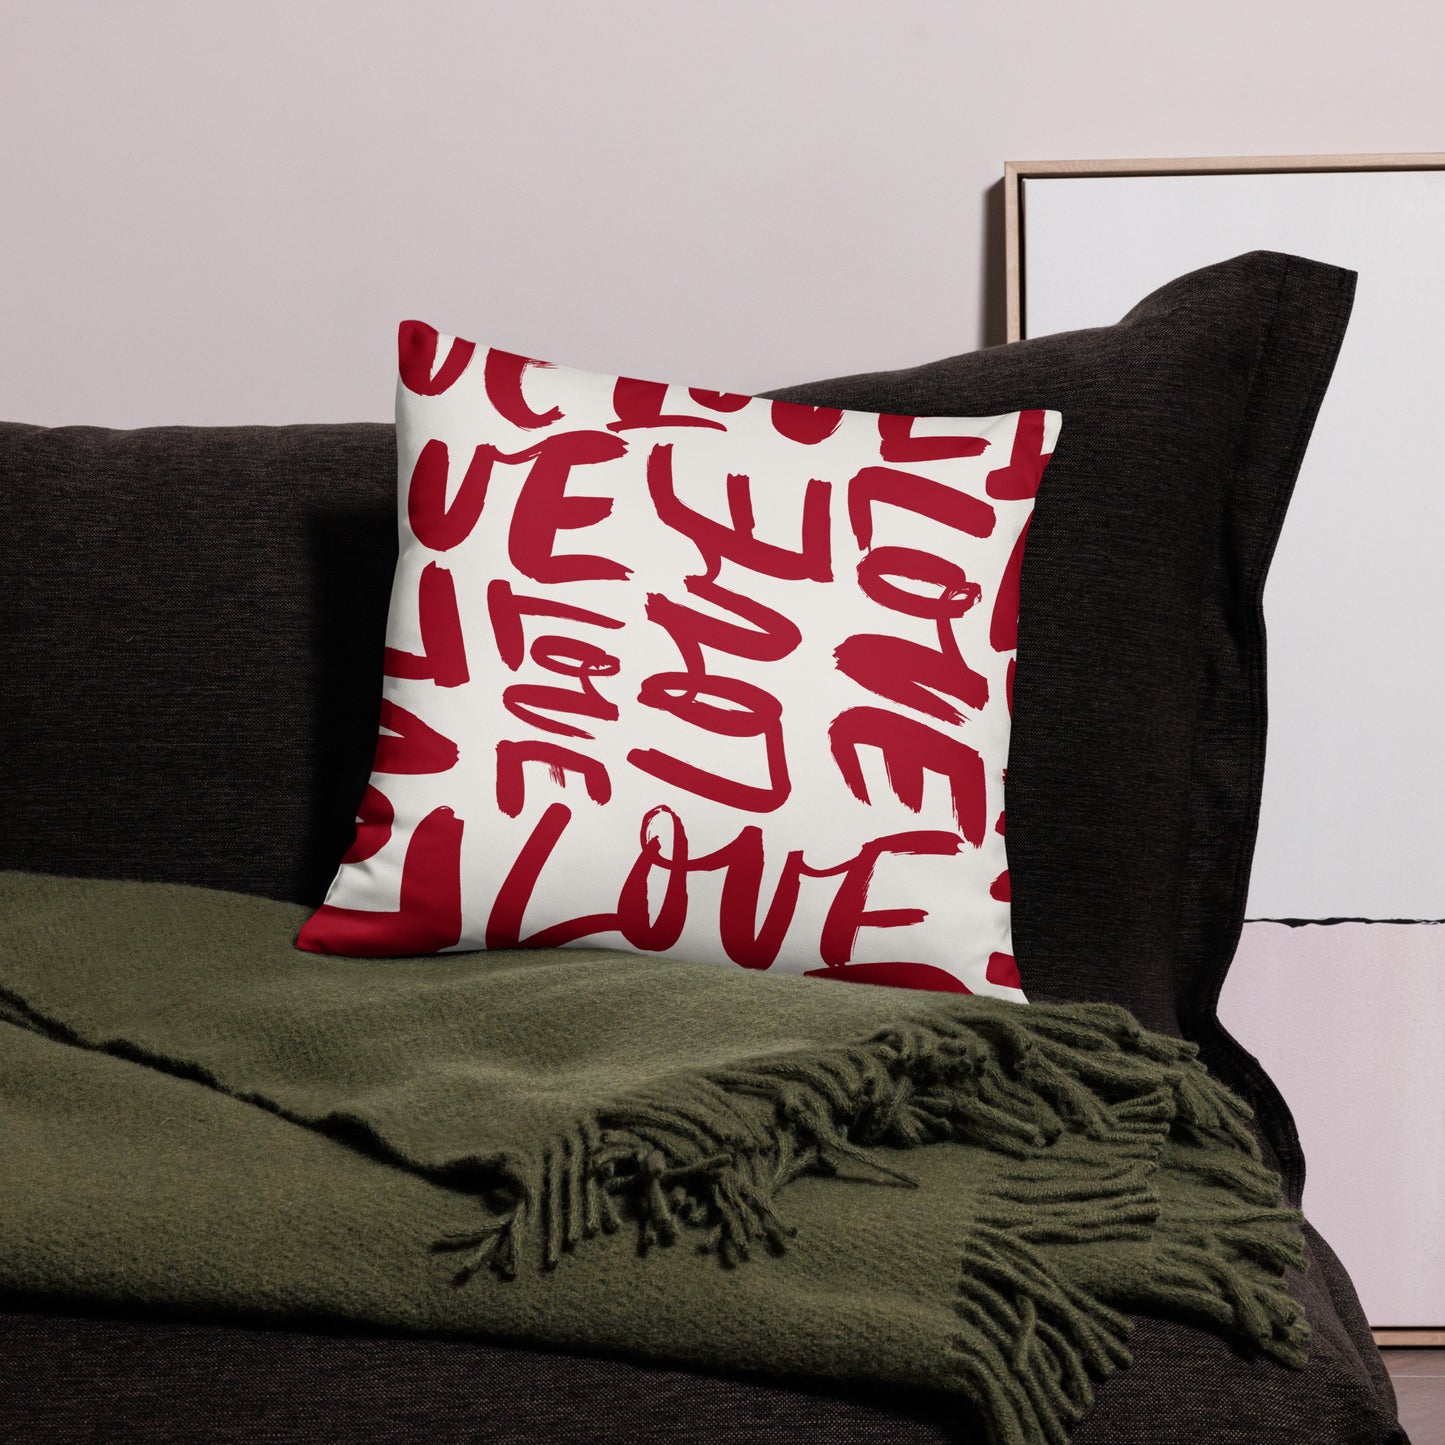 Love-Inspired Premium Pillows: Elevate Your Home with Heartfelt Elegance